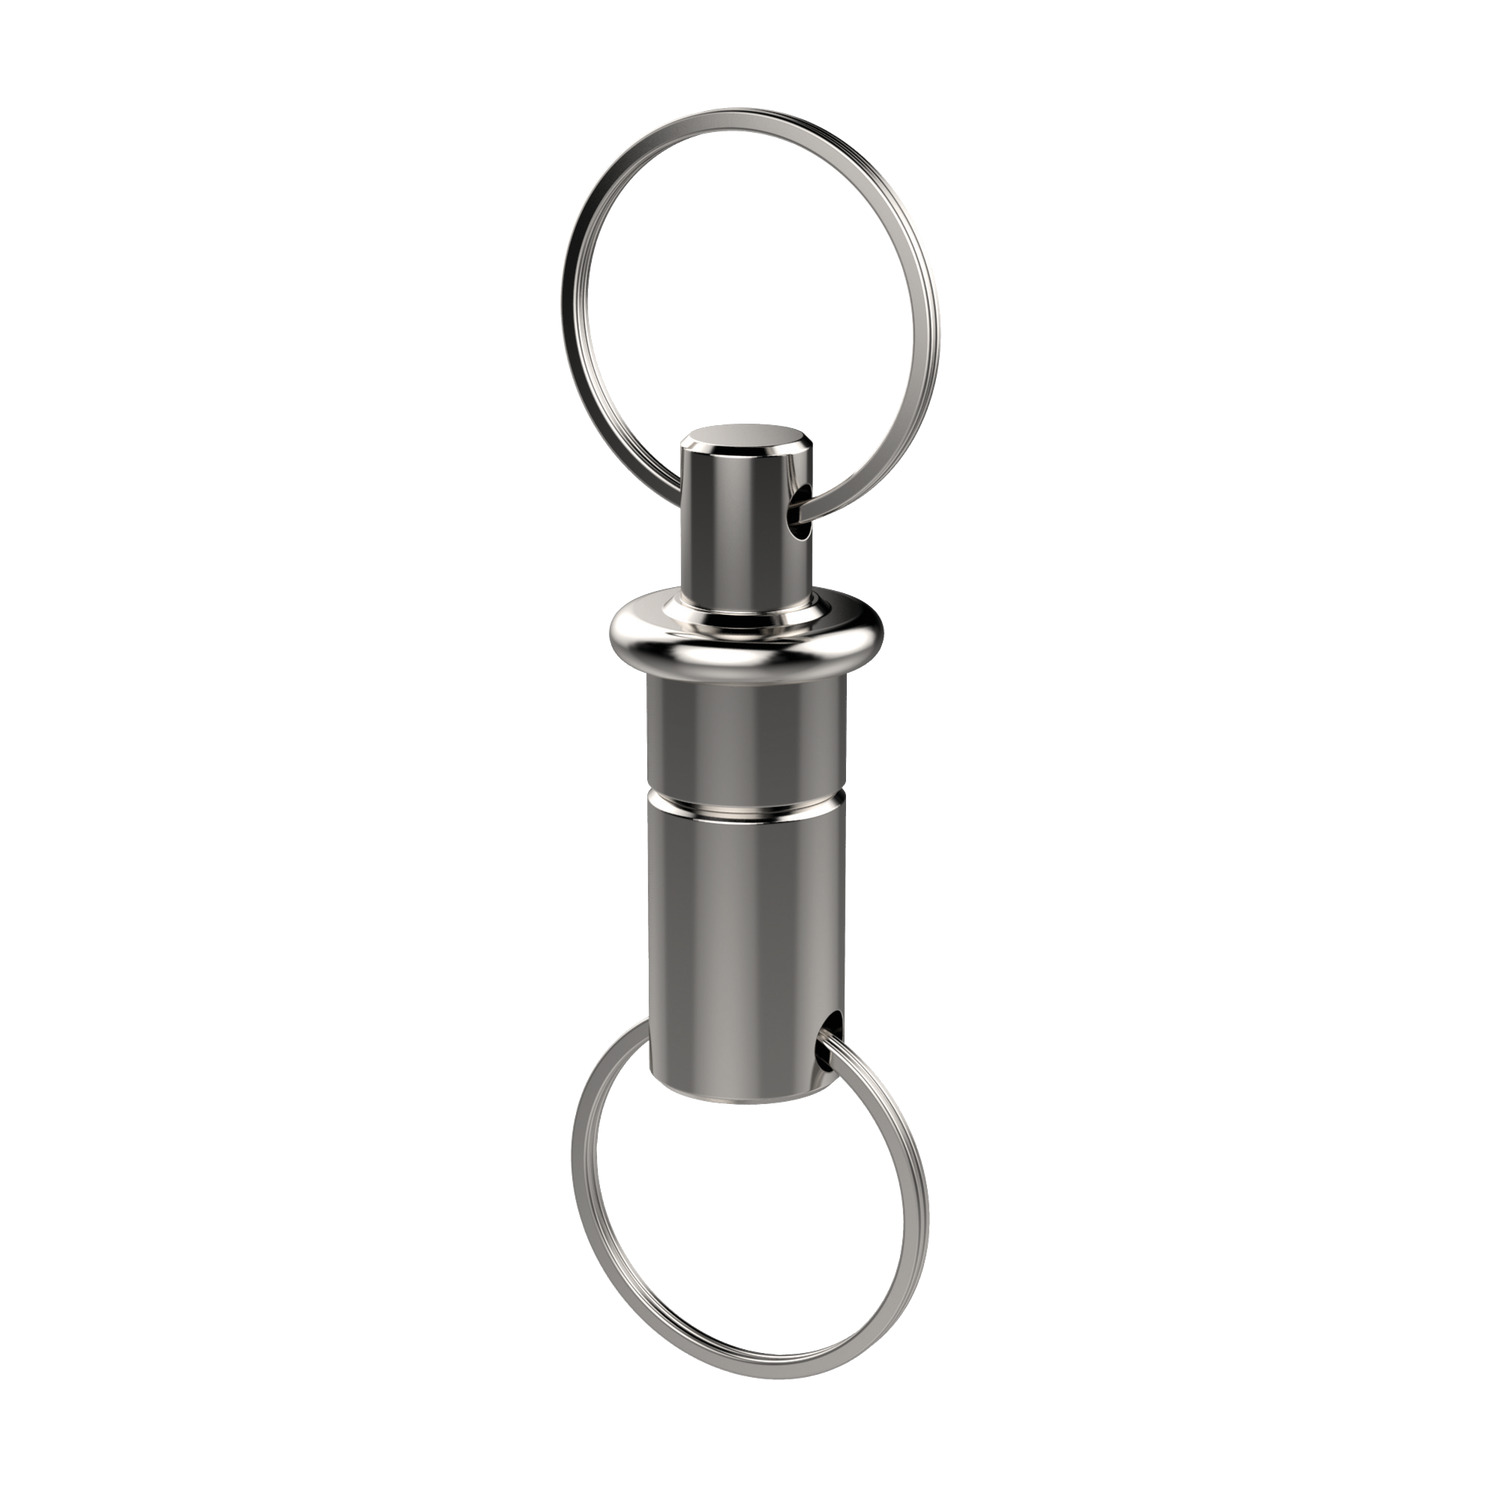 Ball Lock Pins - Single Acting - Key Ring Self locking, single acting ball lock pin with key rings. Made from stainless steel. For use with our lanyards and retaining cables.